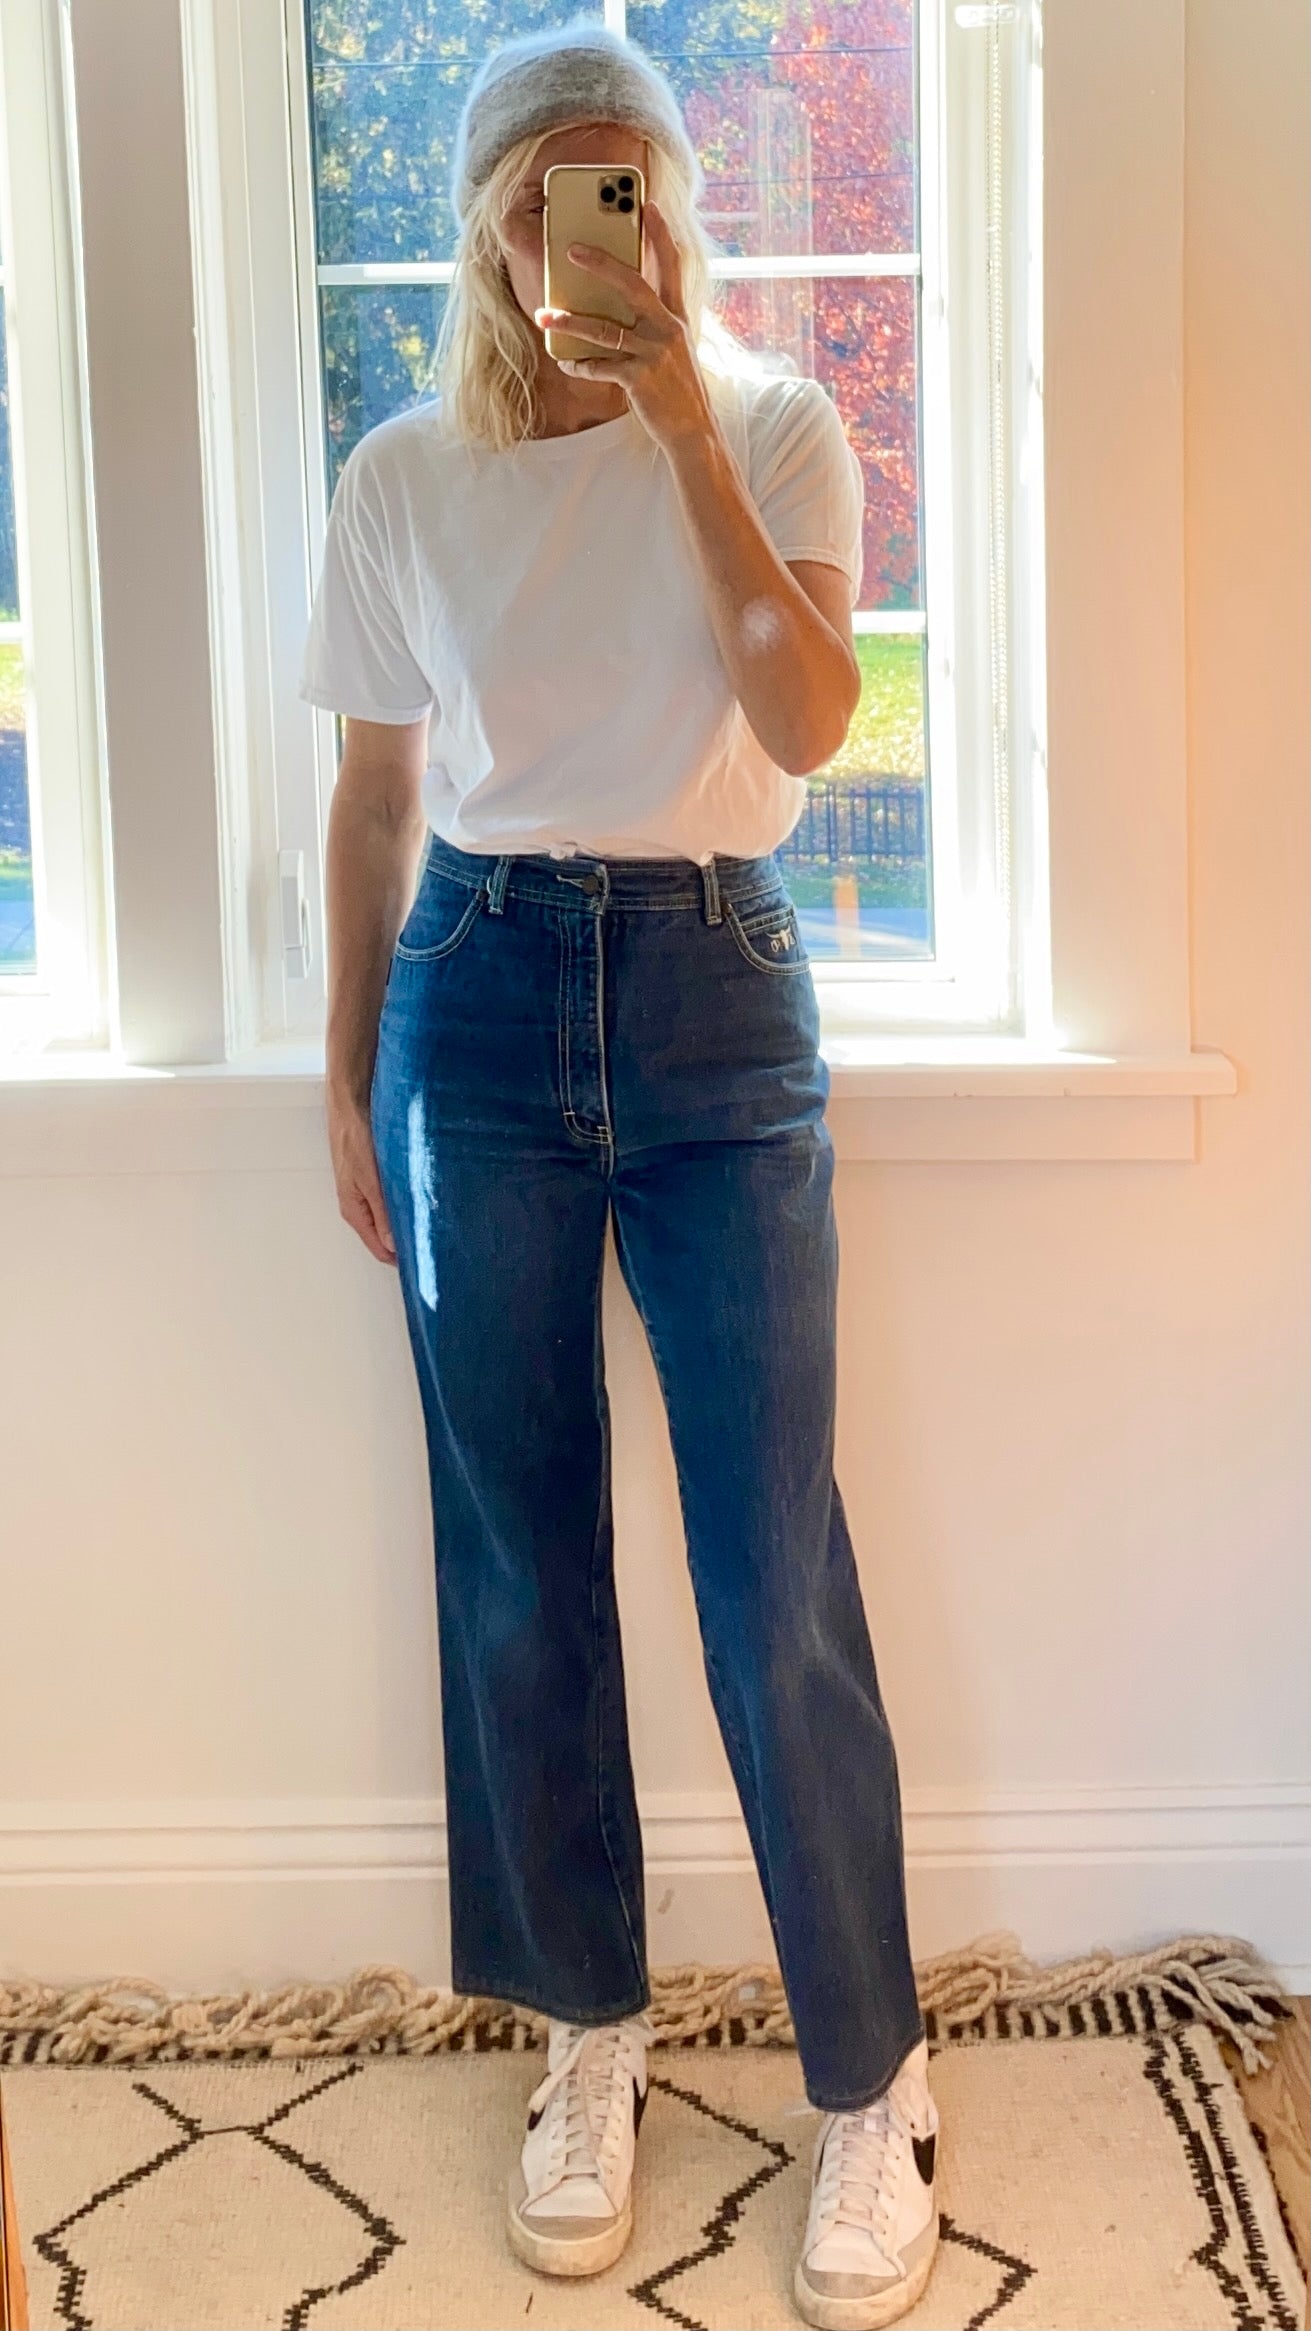 Vintage High Waisted Sergio Valente Jeans size 30